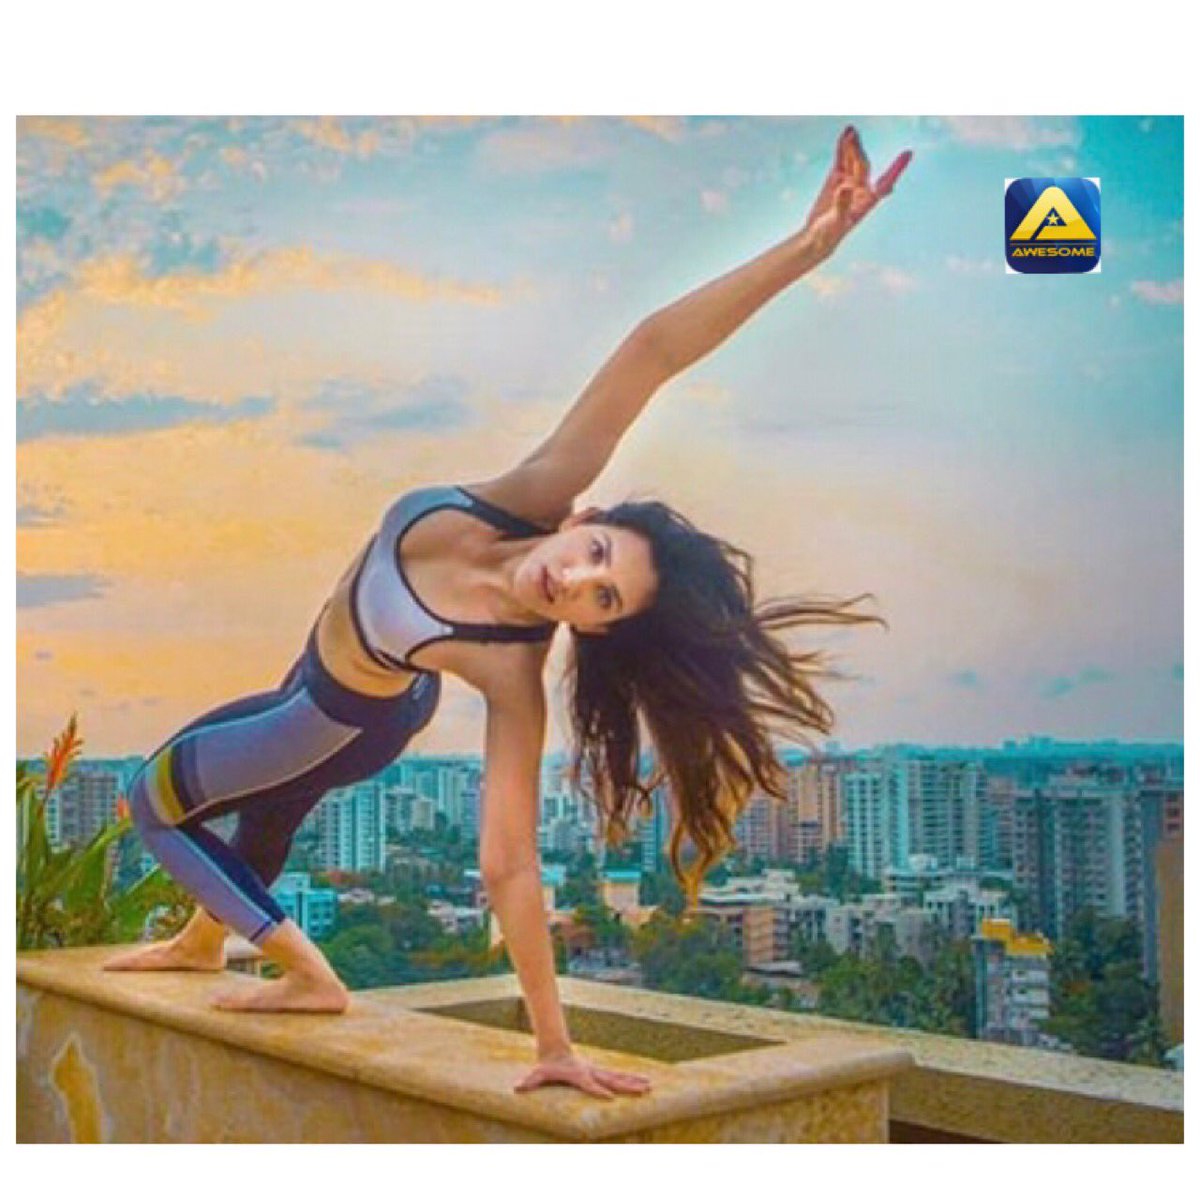 Yoga is being on the top of the world for @SonnalliSeygall 

.
.
.
#sonaliseygal #yogaday #worldyogaday2020 #awesometv #simplyawesome